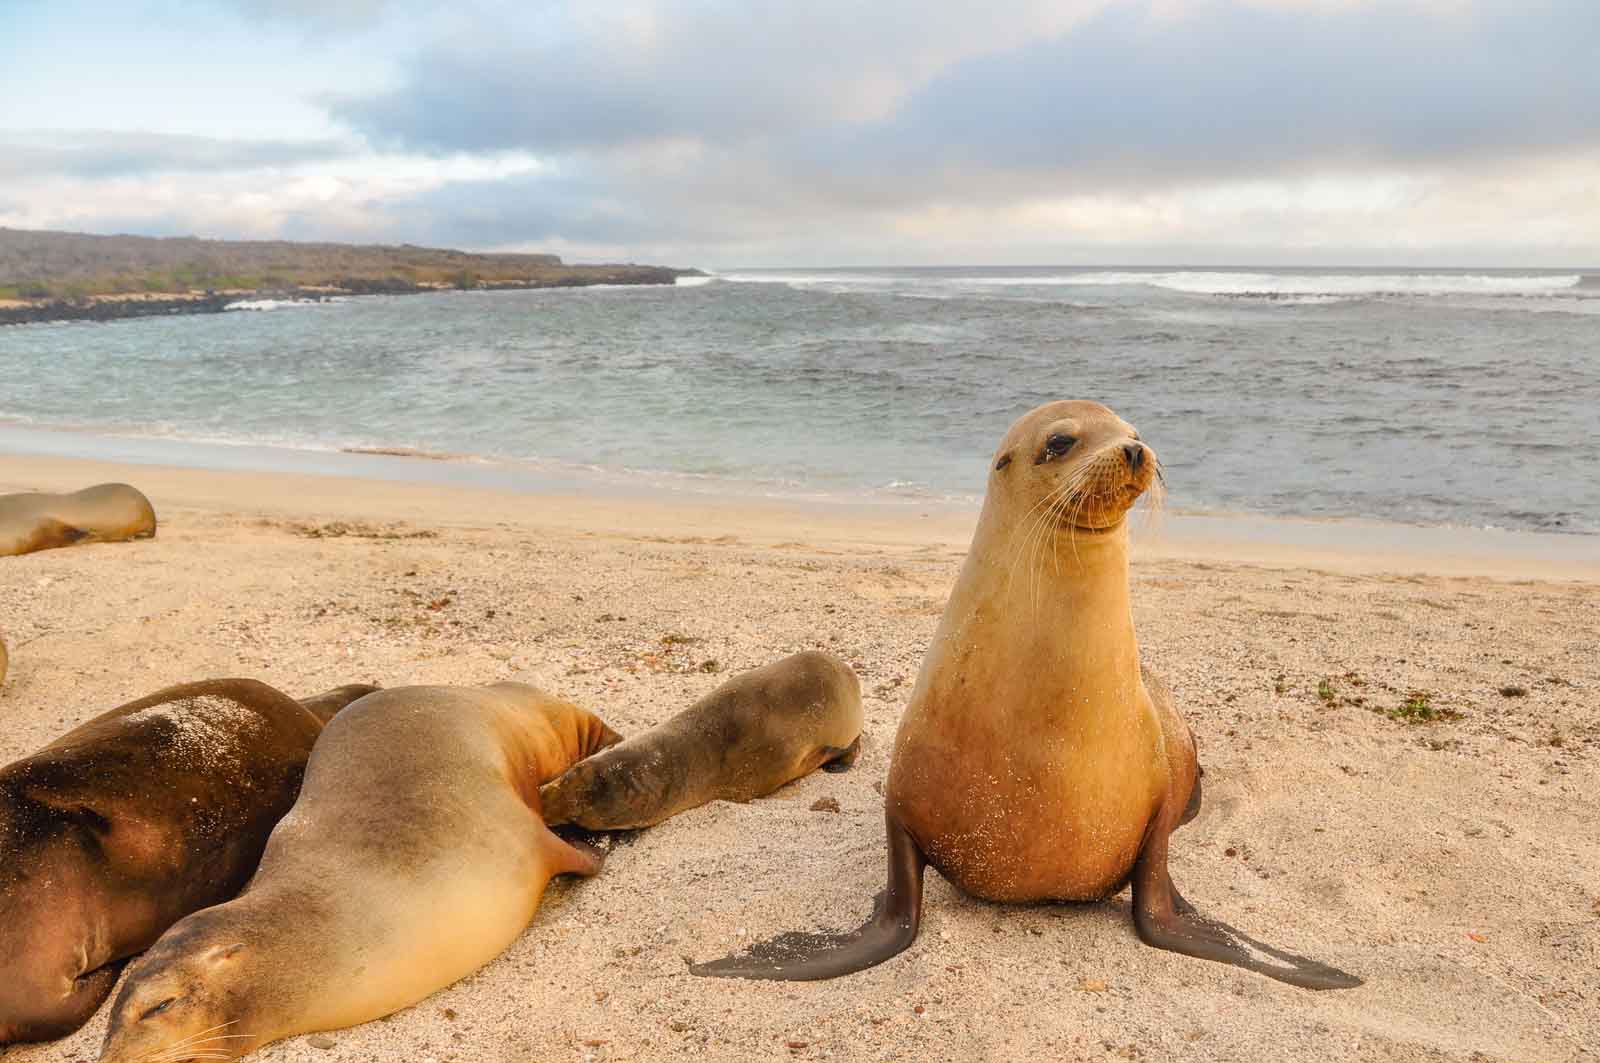  Galapagos | What Are Galapagos Islands Famous For? Discovering Nature's Wonders